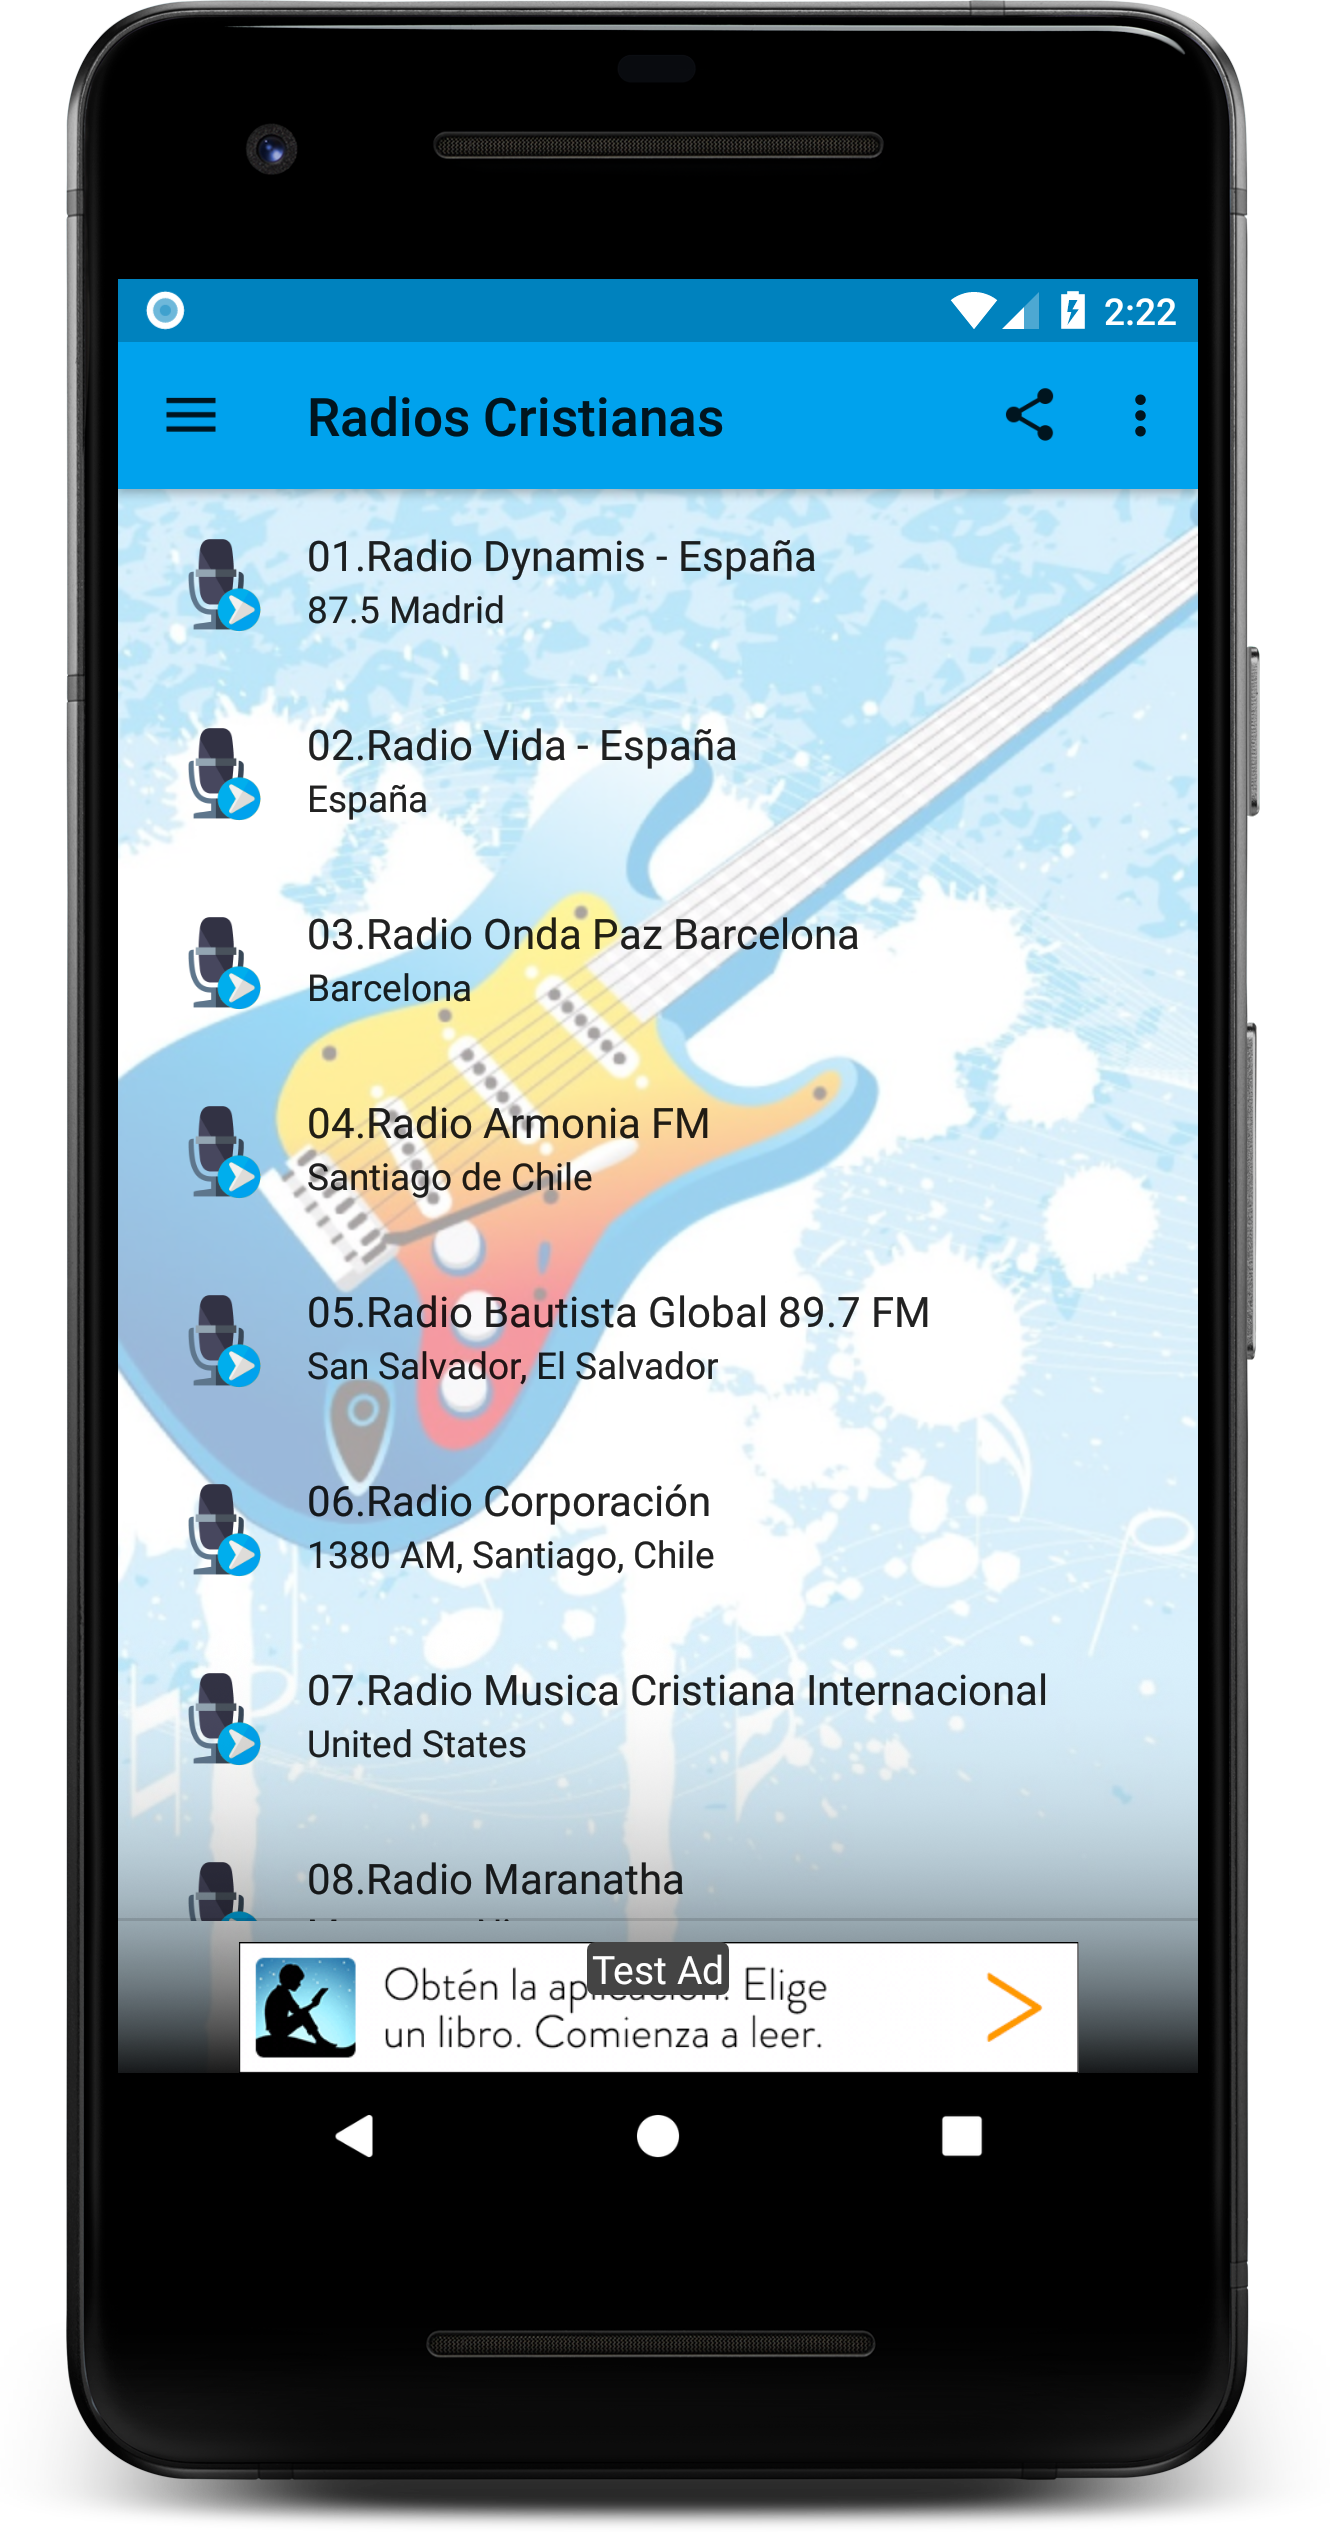 Radios Cristianas APK 3.0.1 for Android – Download Radios Cristianas APK  Latest Version from APKFab.com